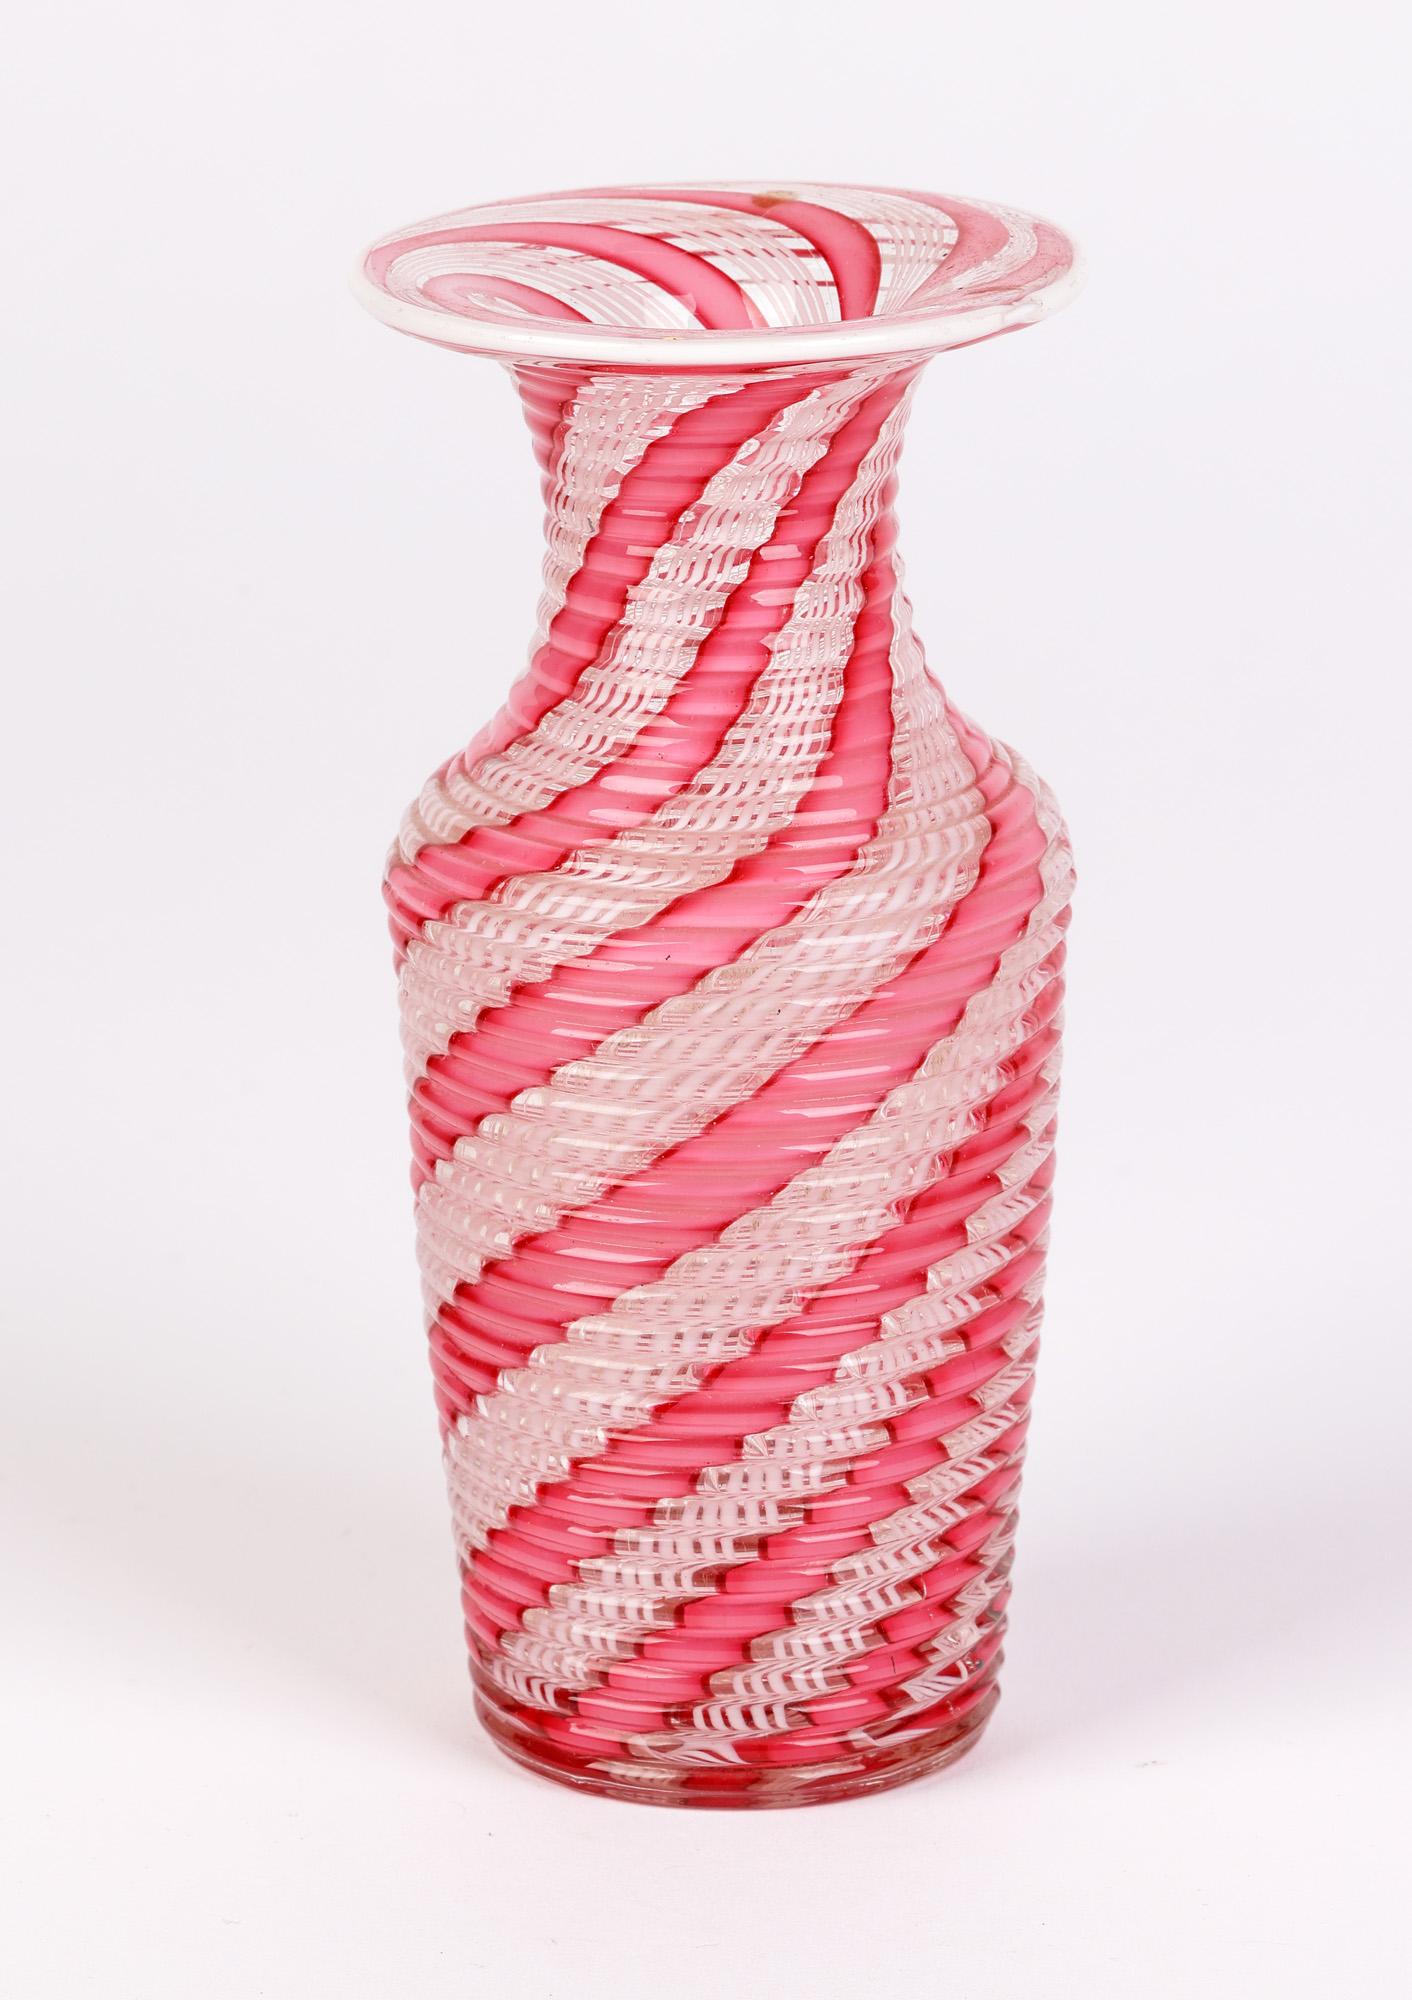 Hand-Crafted Clichy French Latticinio Pink Ribbon Patterned Glass Vase For Sale